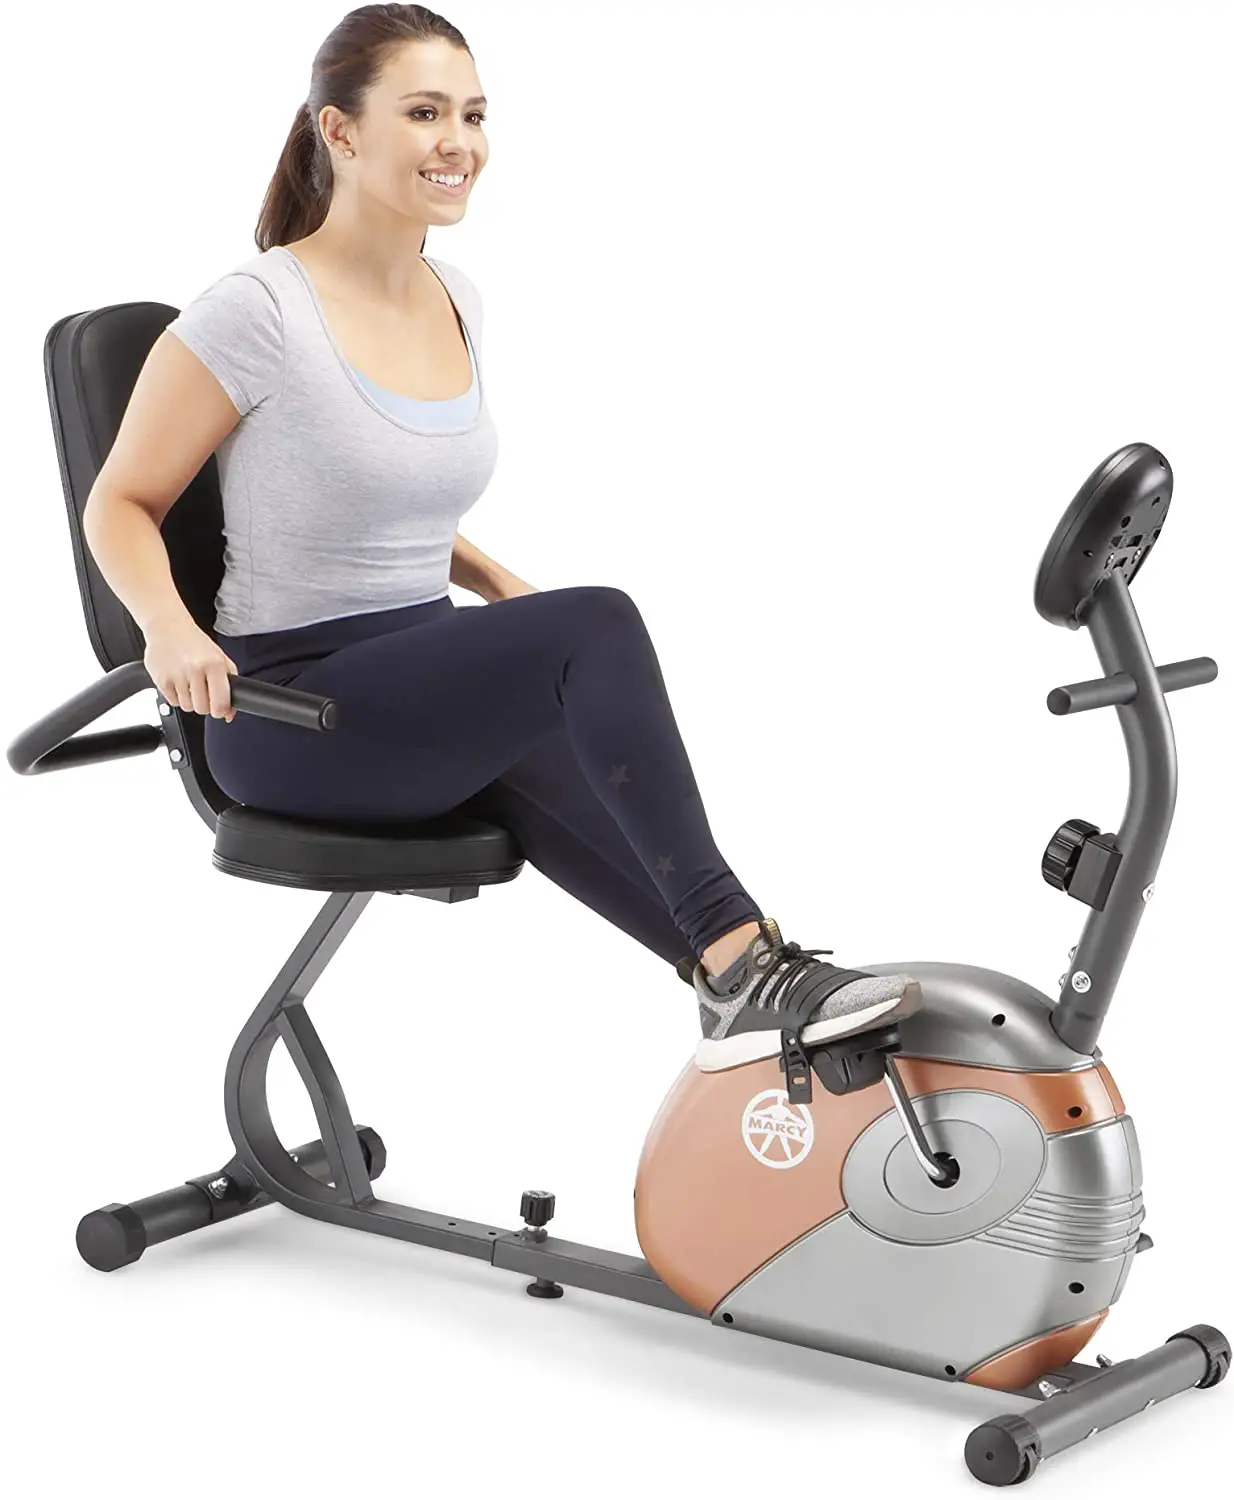 How to Buy an Exercise Bike